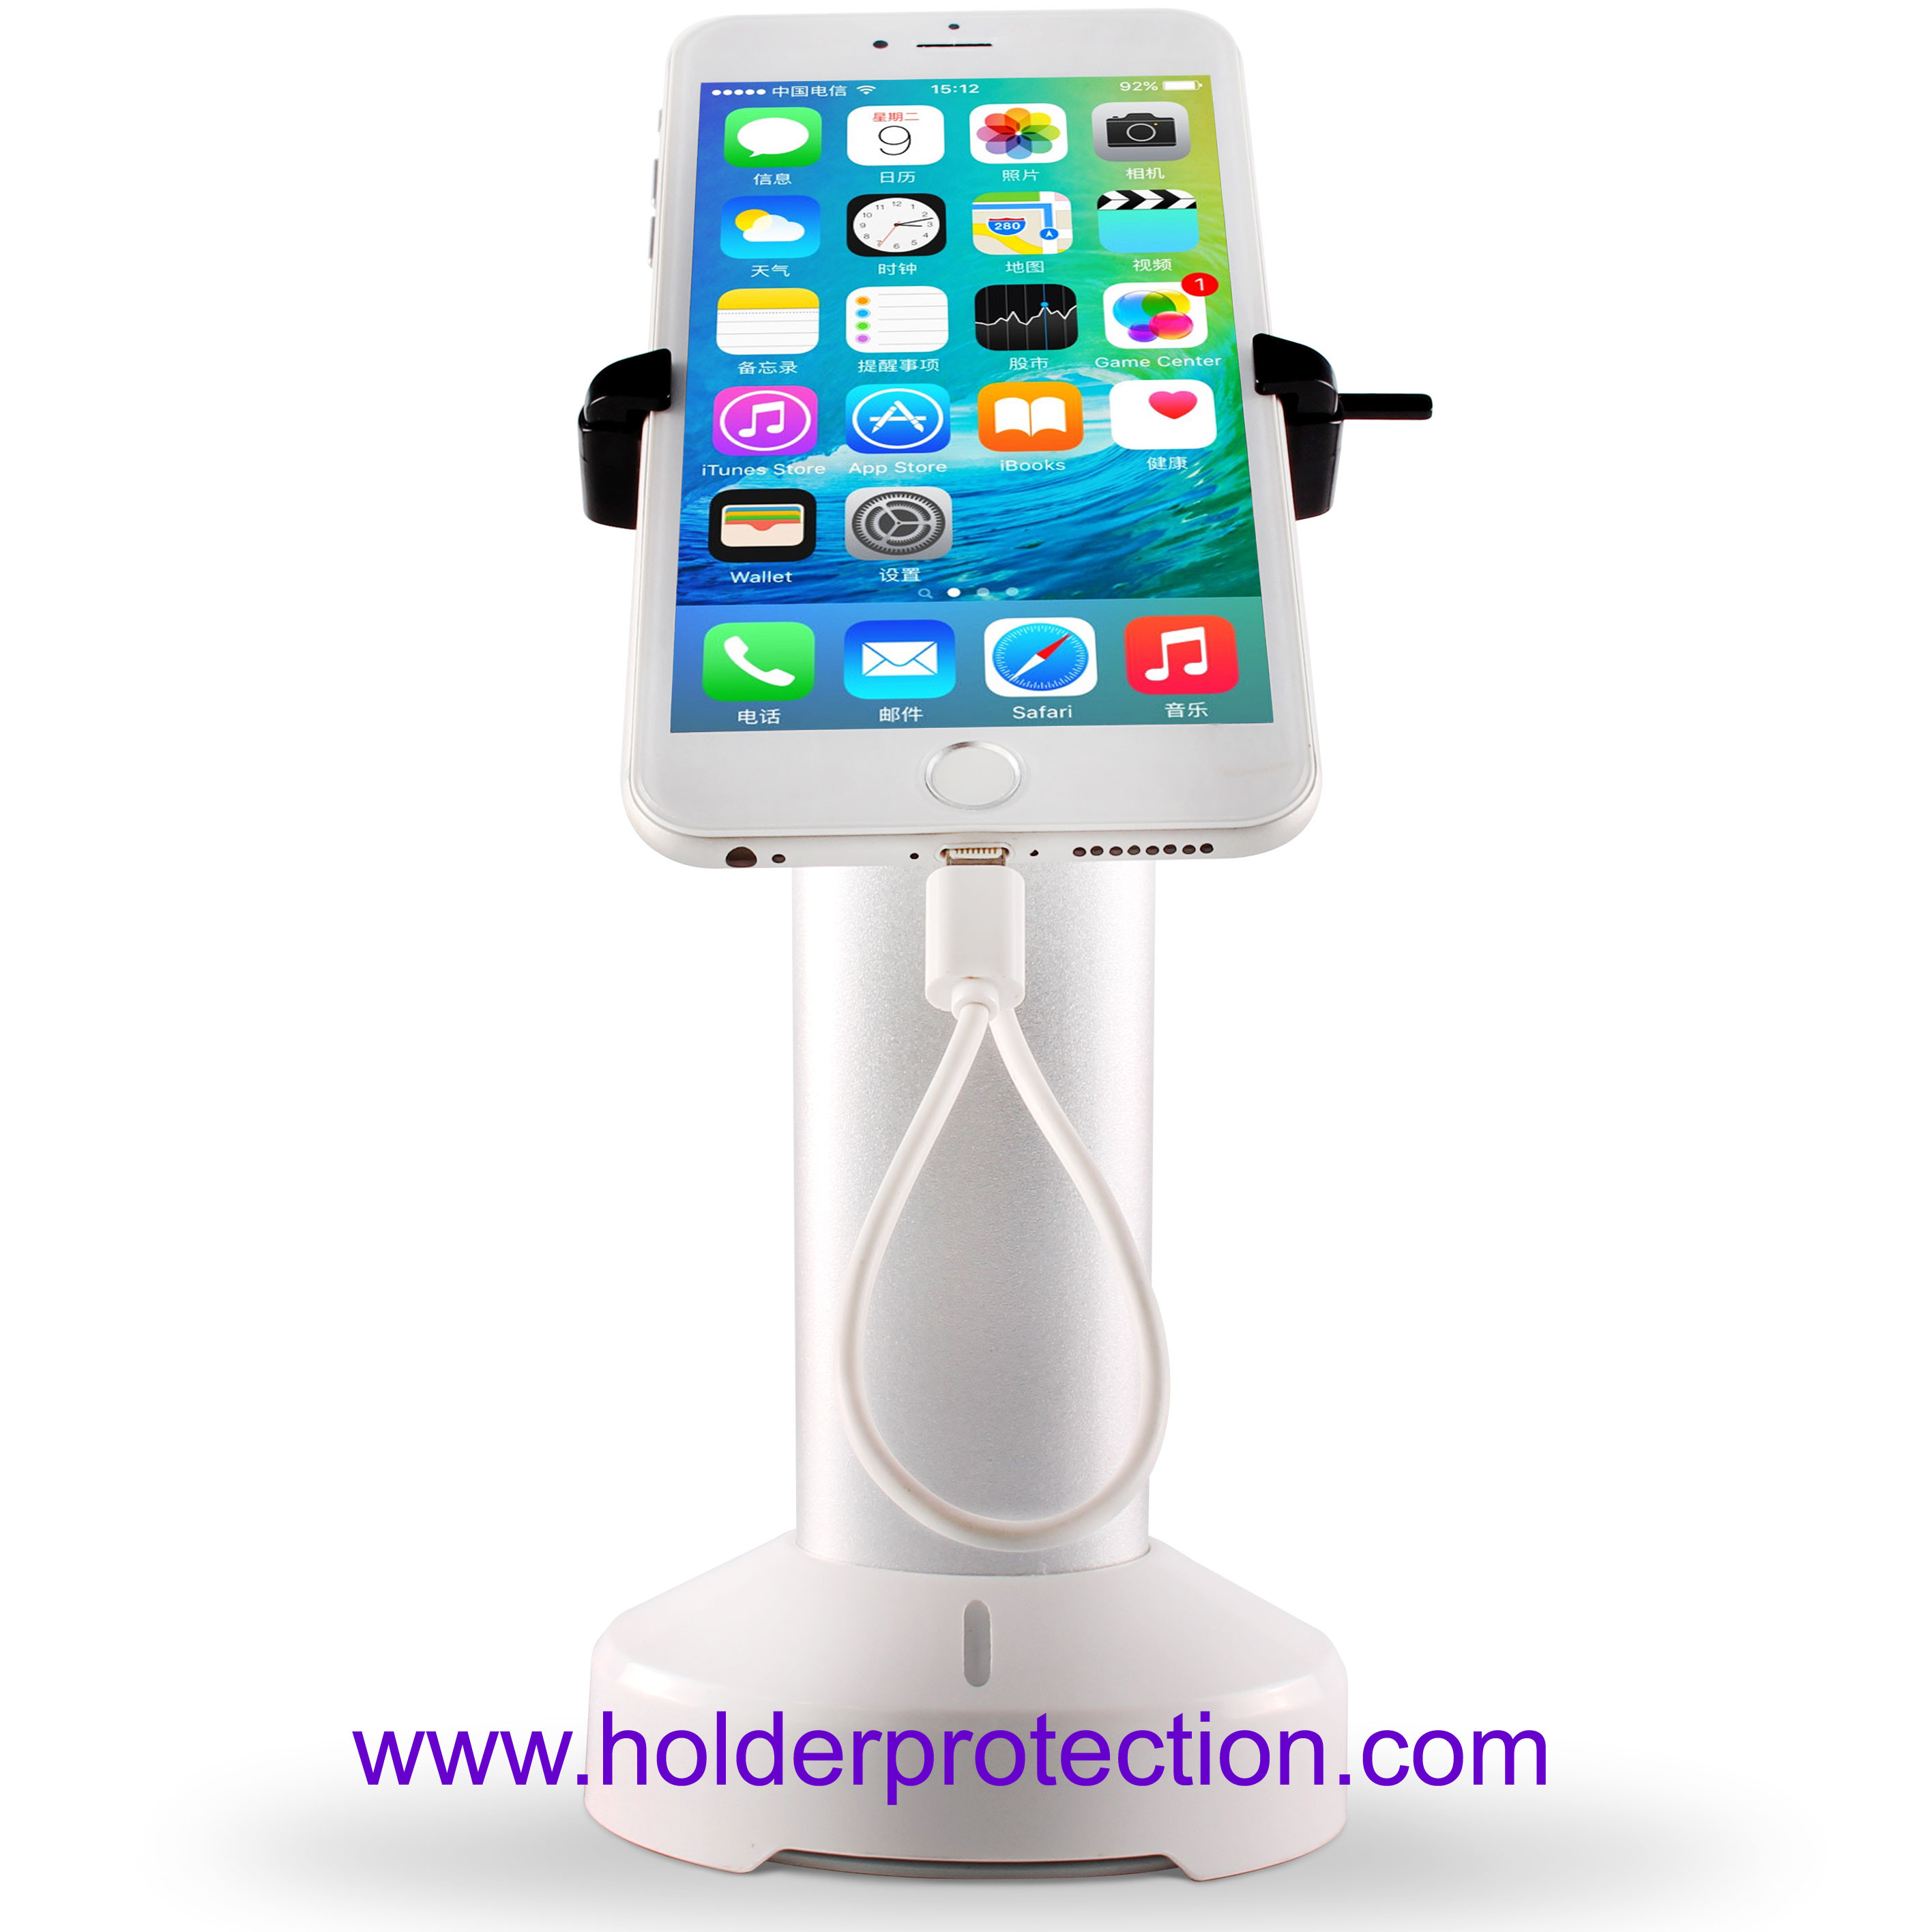 COMER stand-alone with gripper option and alarm mobile display security cradle with charger cable